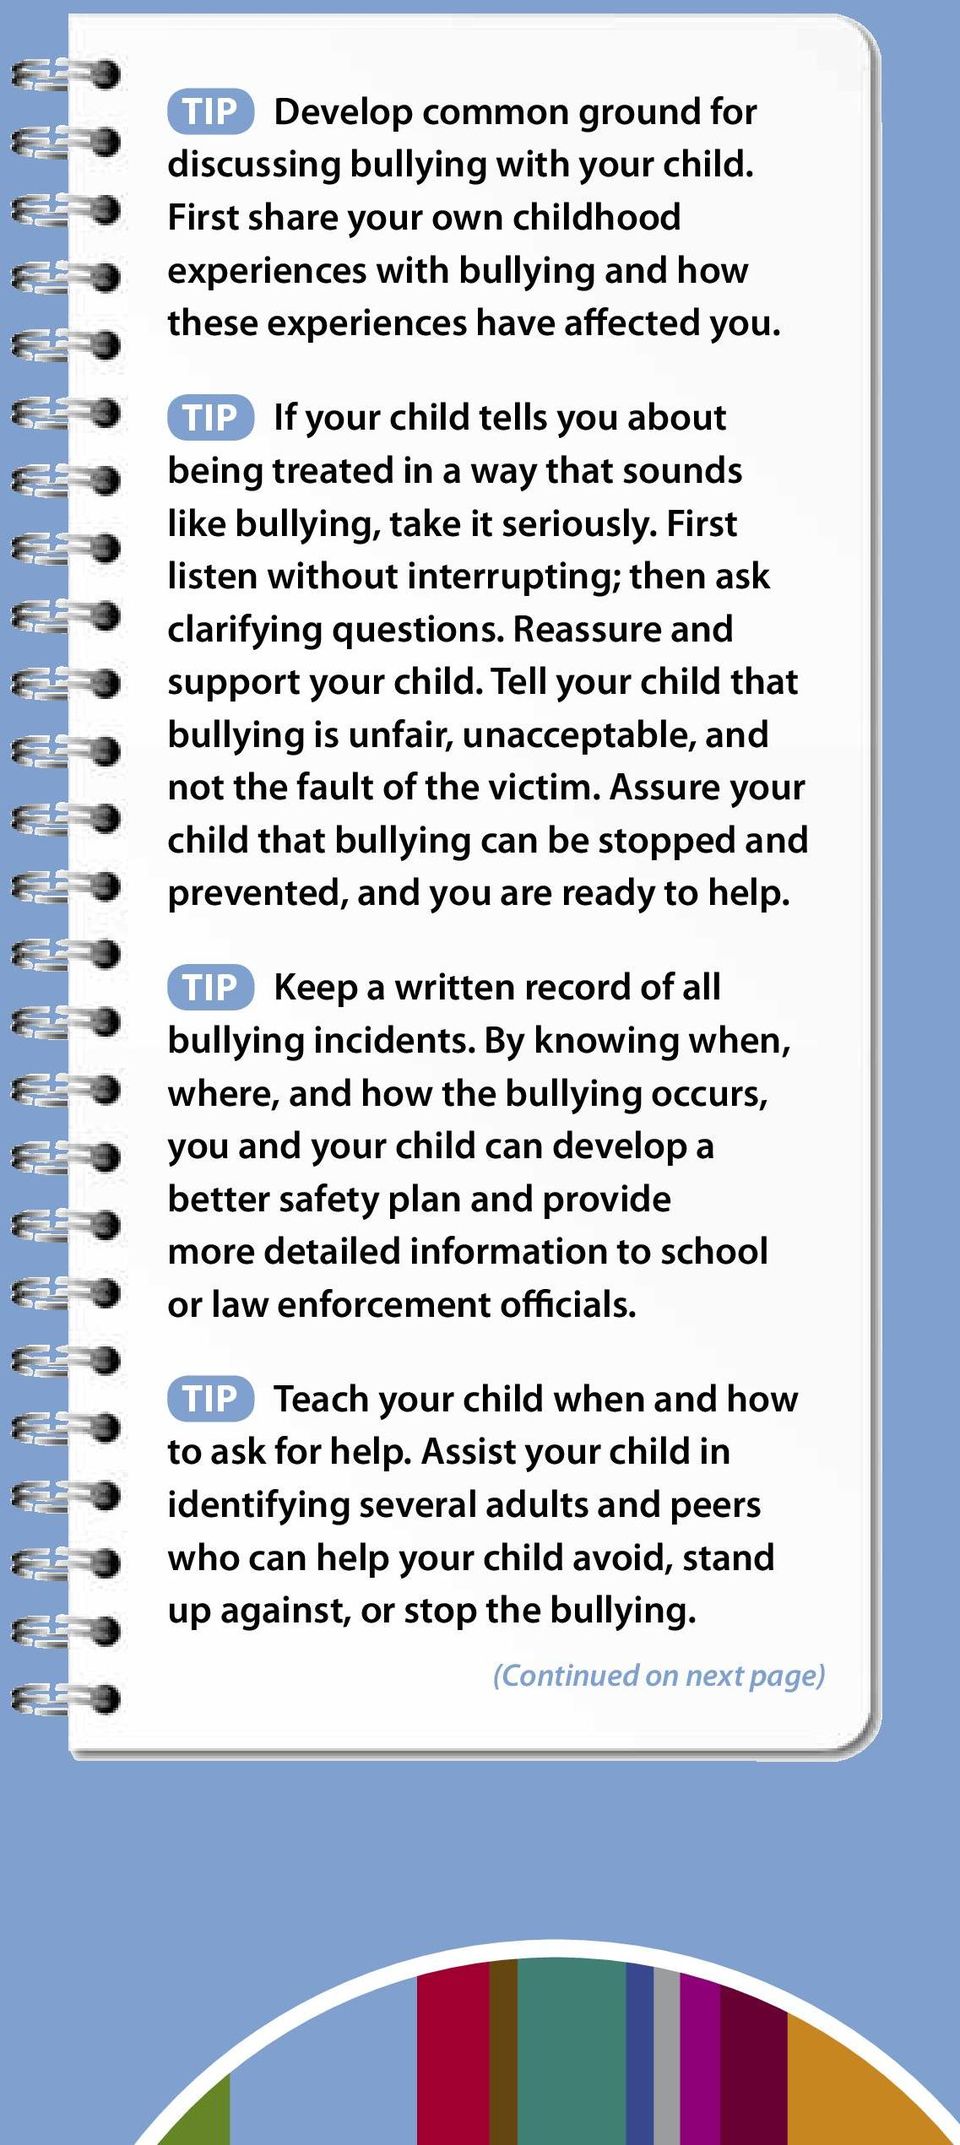 Reassure and support your child. Tell your child that bullying is unfair, unacceptable, and not the fault of the victim.